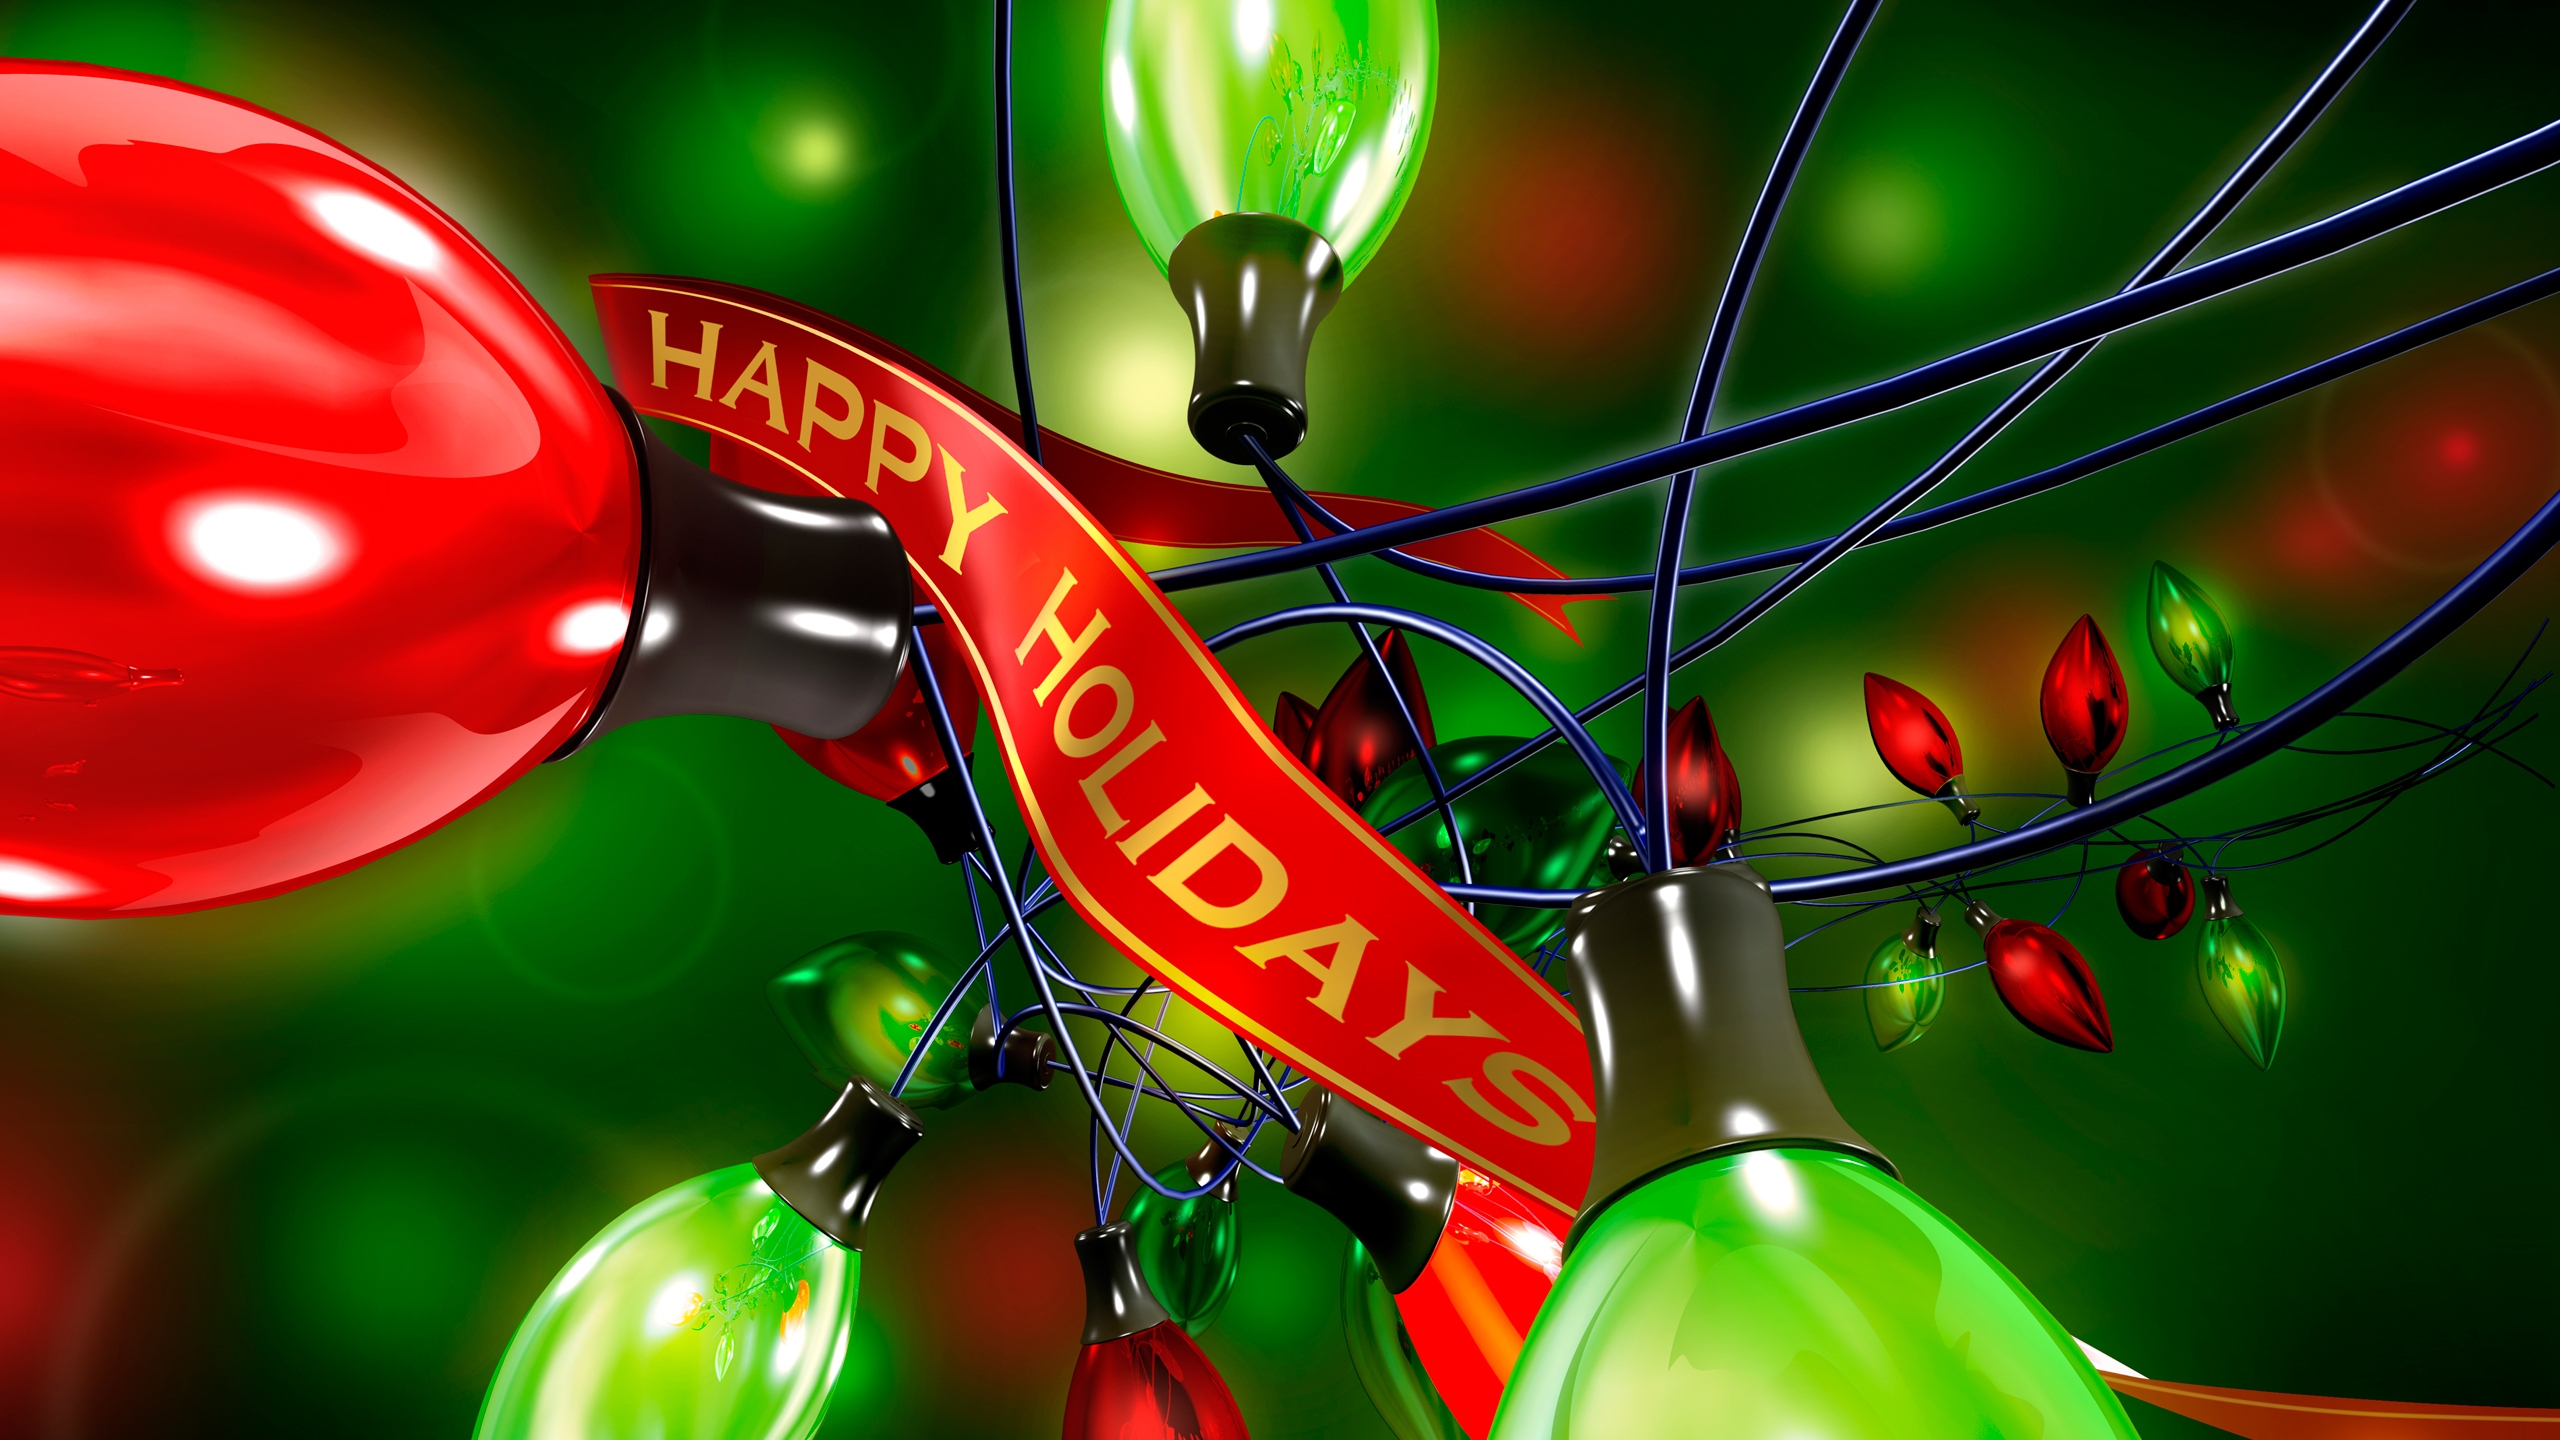 Happy Holidays Everyone for 2560x1440 HDTV resolution